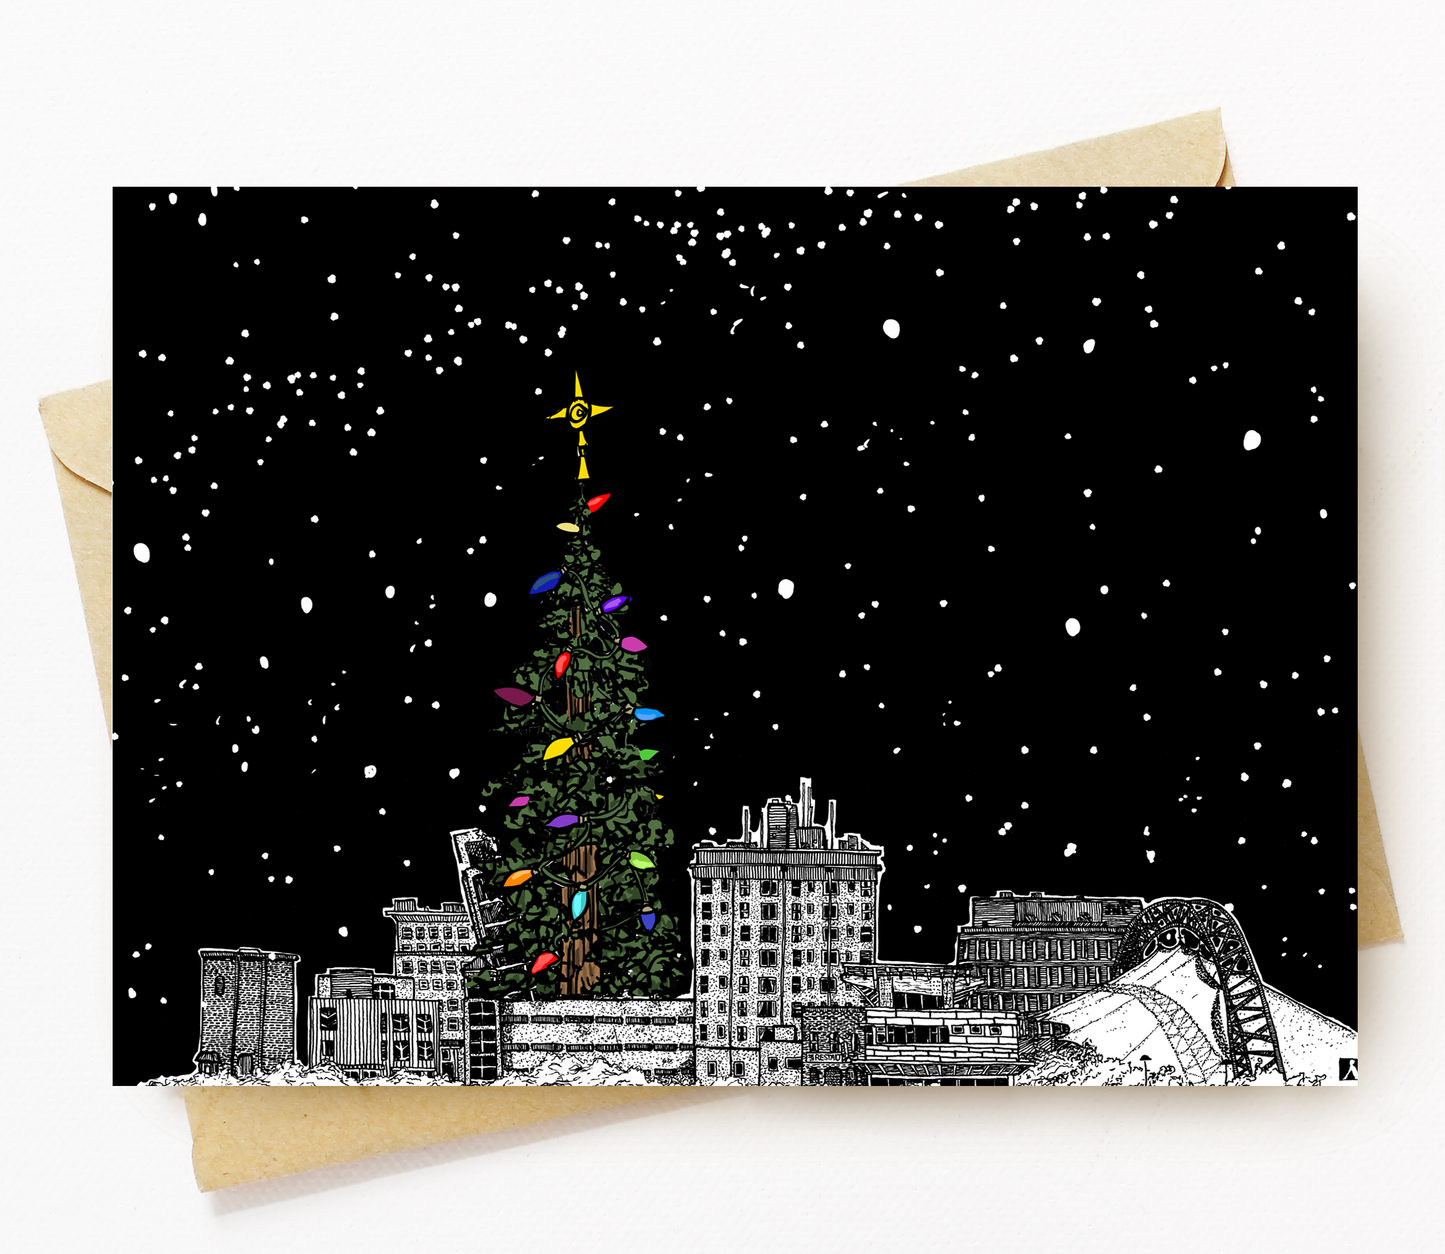 BellavanceInk: Pen & Ink Charlottesville City Skyline Christmas Card With Santa Clause And Reindeer 5 x 7 Inches